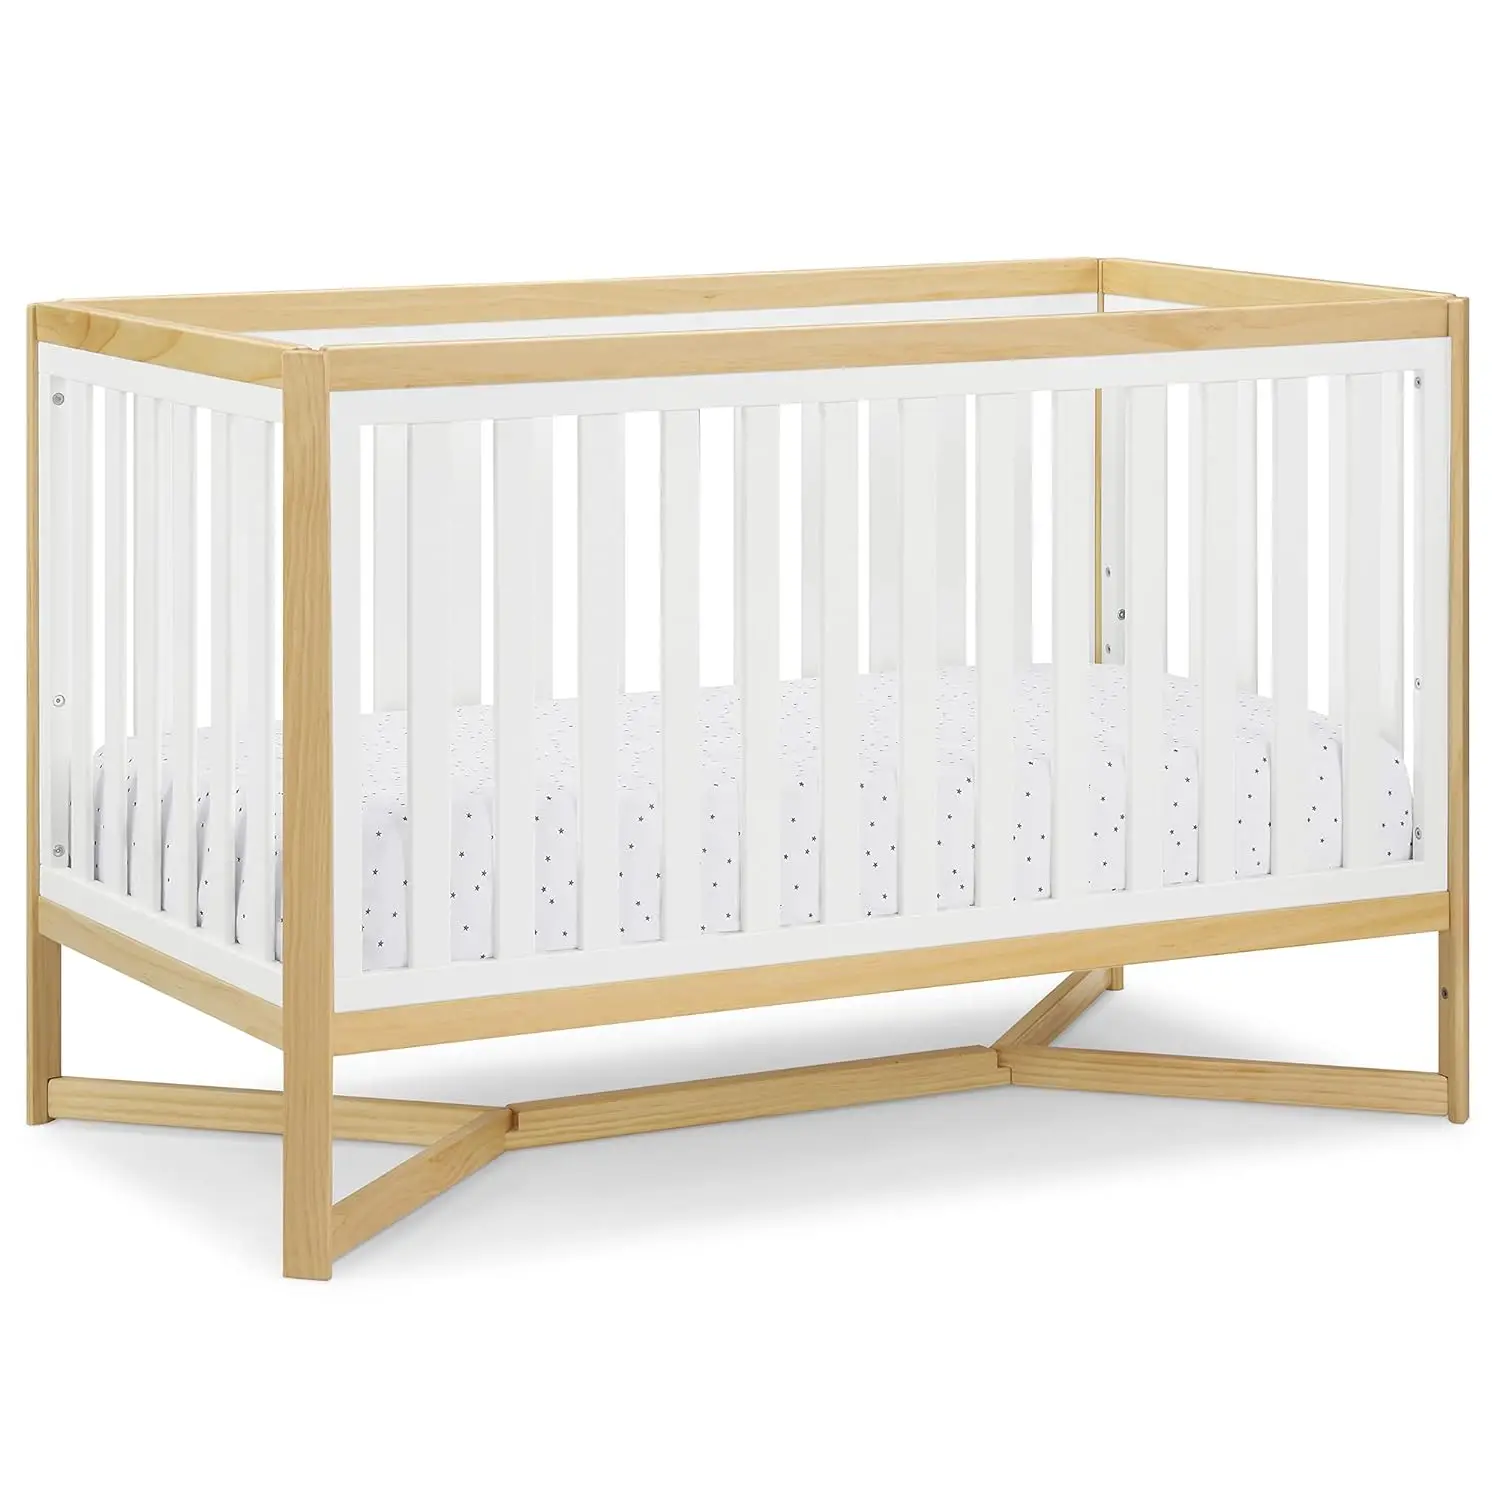 

Delta Children Tribeca 4-in-1 Baby Convertible Crib, Bianca White/Natural,Mattress not included.